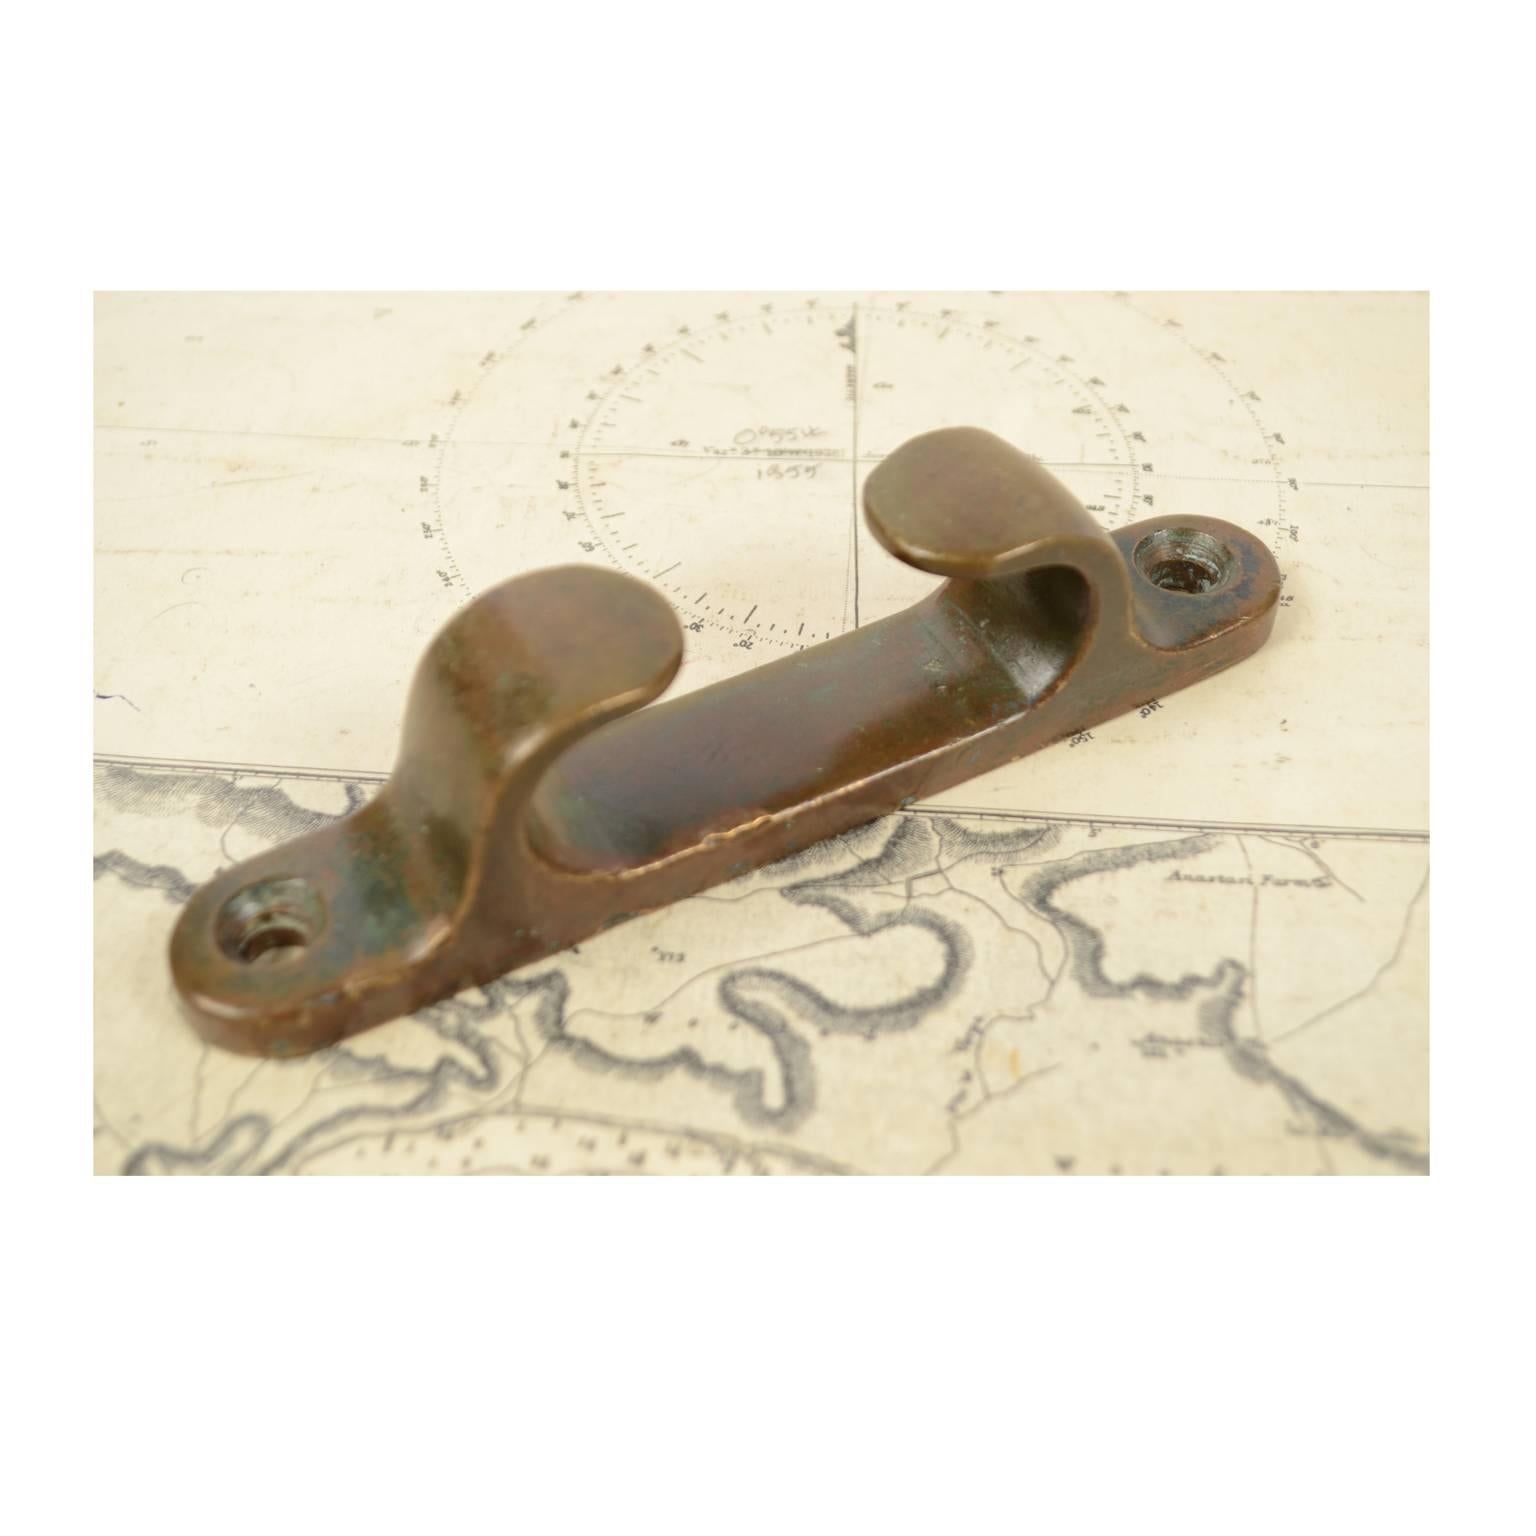 Bronze nautical fairlead used to prevent the unhooking of ropes. Width cm 15 x 2.5. French manufacture of the 20s. Very good condition.
Shipping insured by Lloyd's London; it is available our free gift box (look at the last picture).